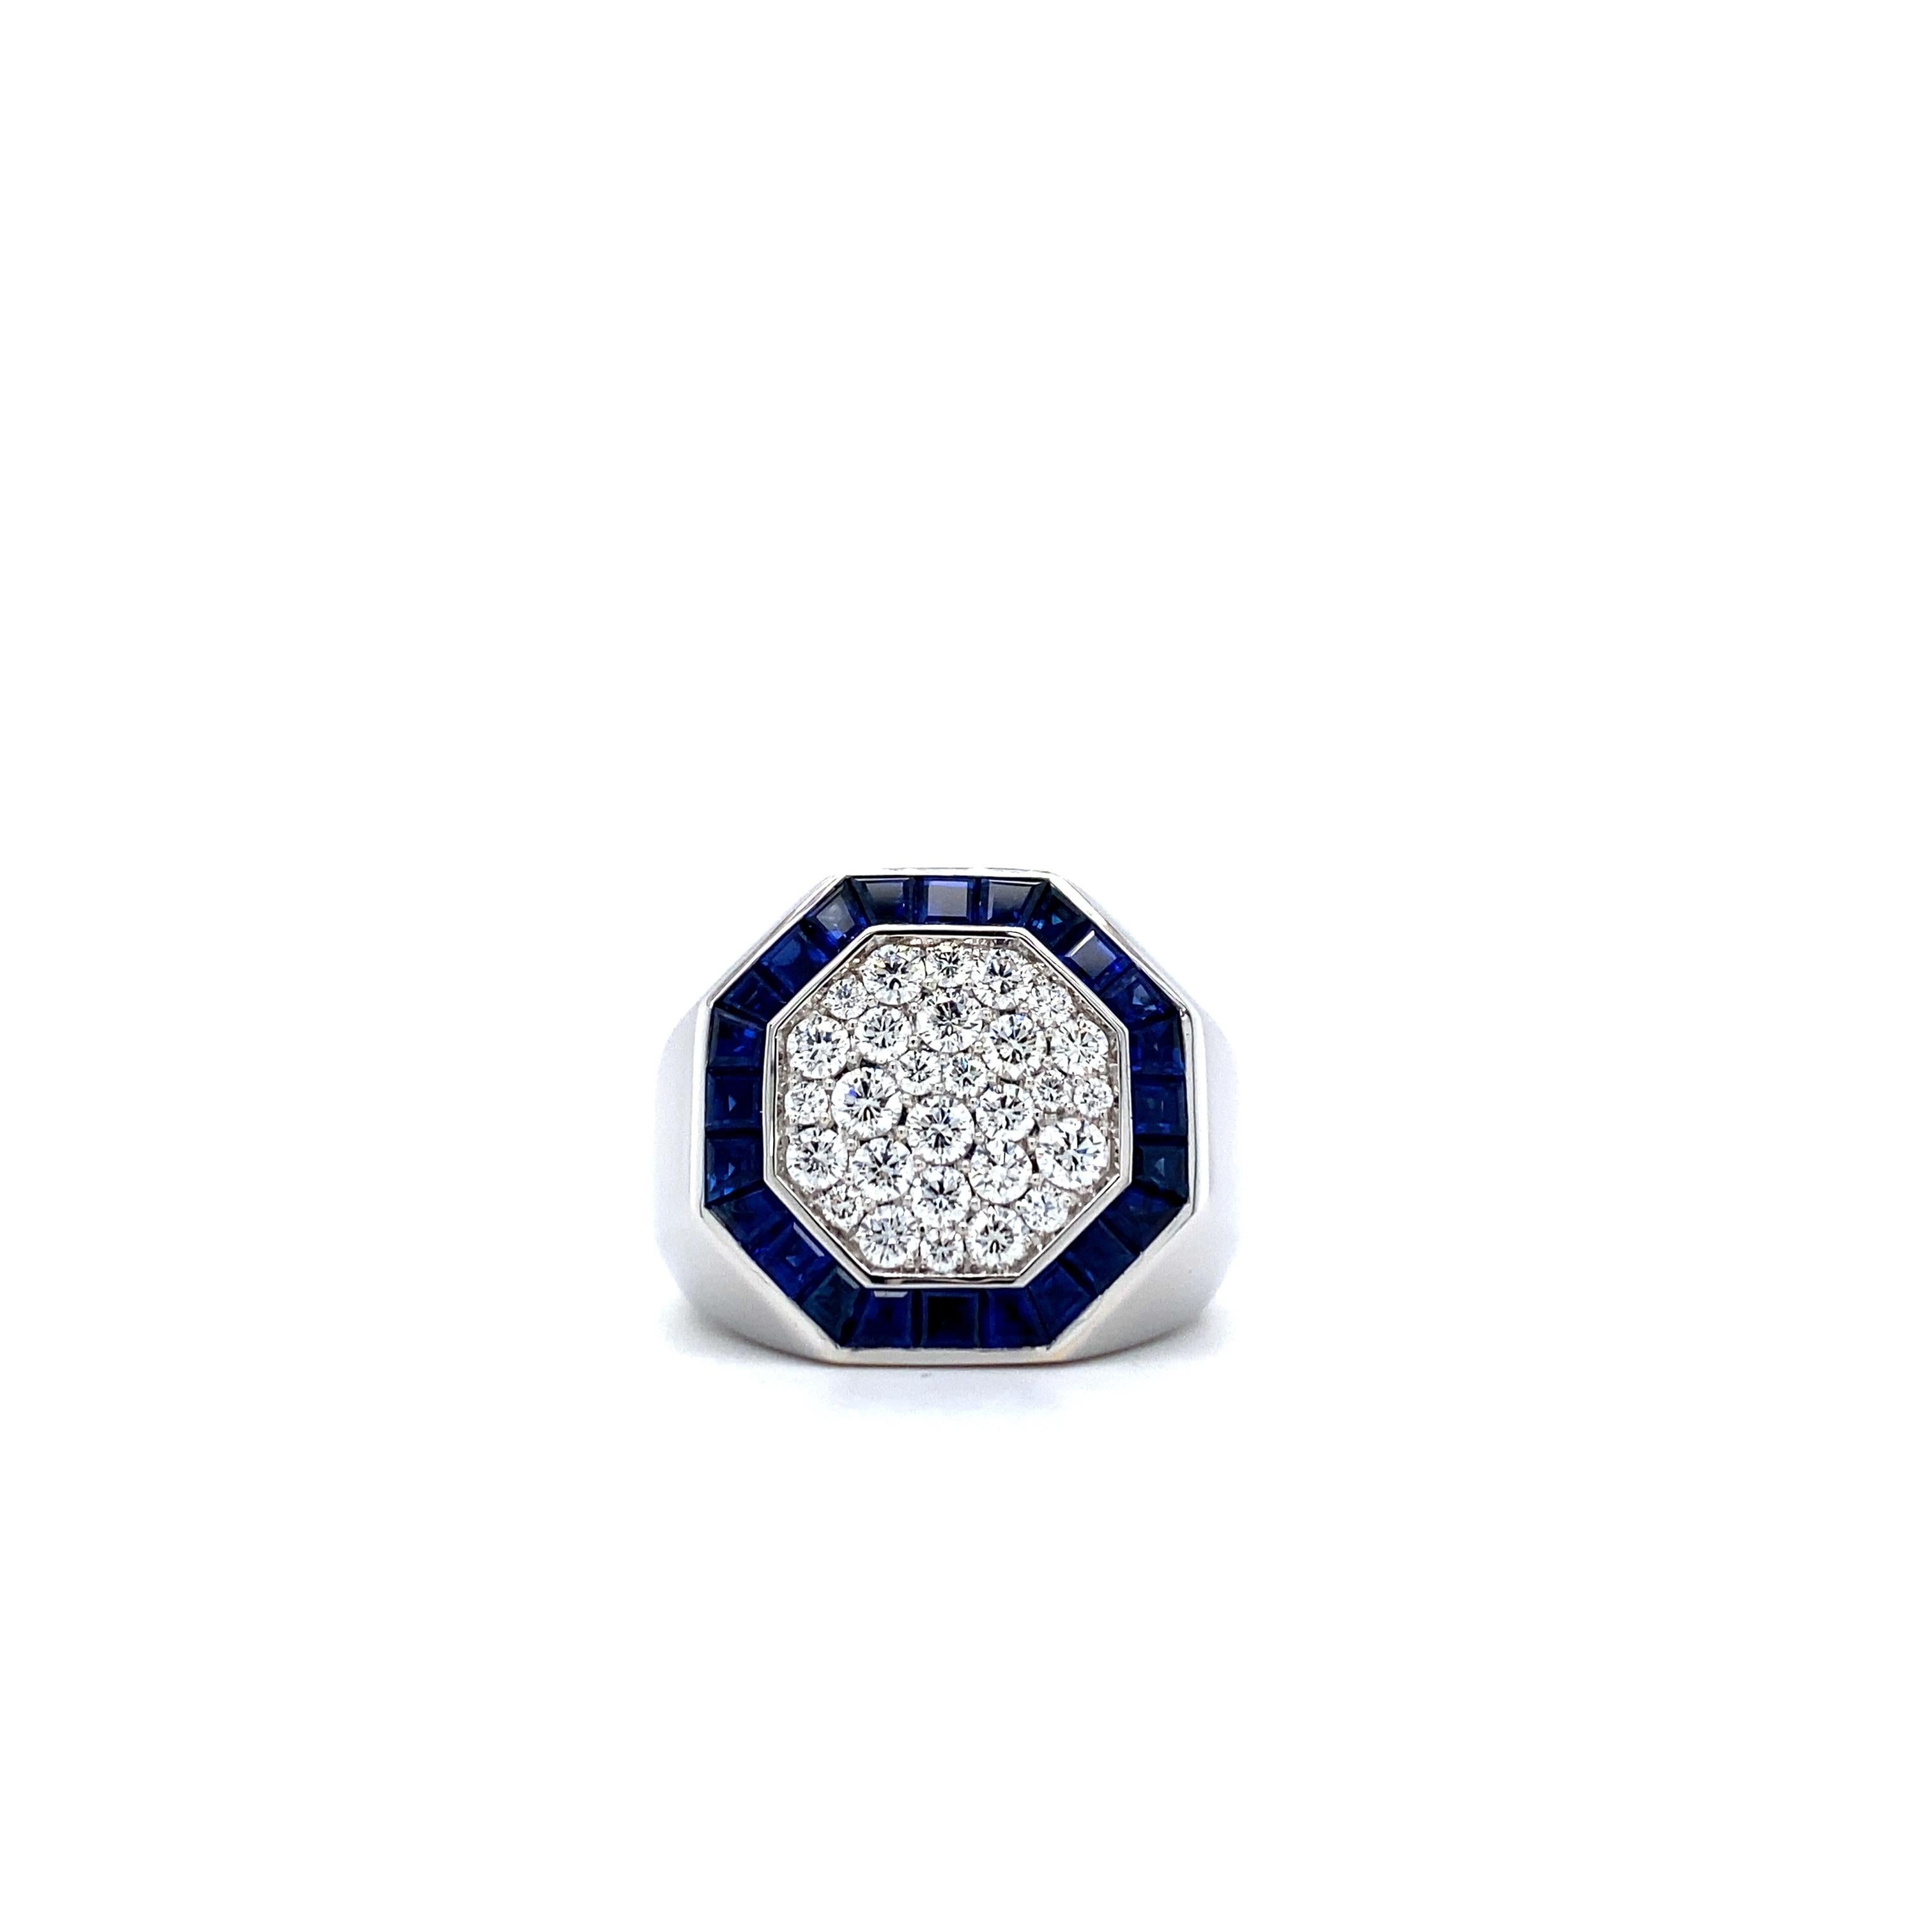 Victor Mayer Signet Ring, 18k white gold, 28 diamonds total 0.85 ct, G VS brilliant cut, 24 invisibly set sapphires total 1.77 ct, limited edition of 50 pieces

Reference: V1355/00/3H/00/101
Brand: VICTOR MAYER
Collection: Art Deco 
Material: 18k